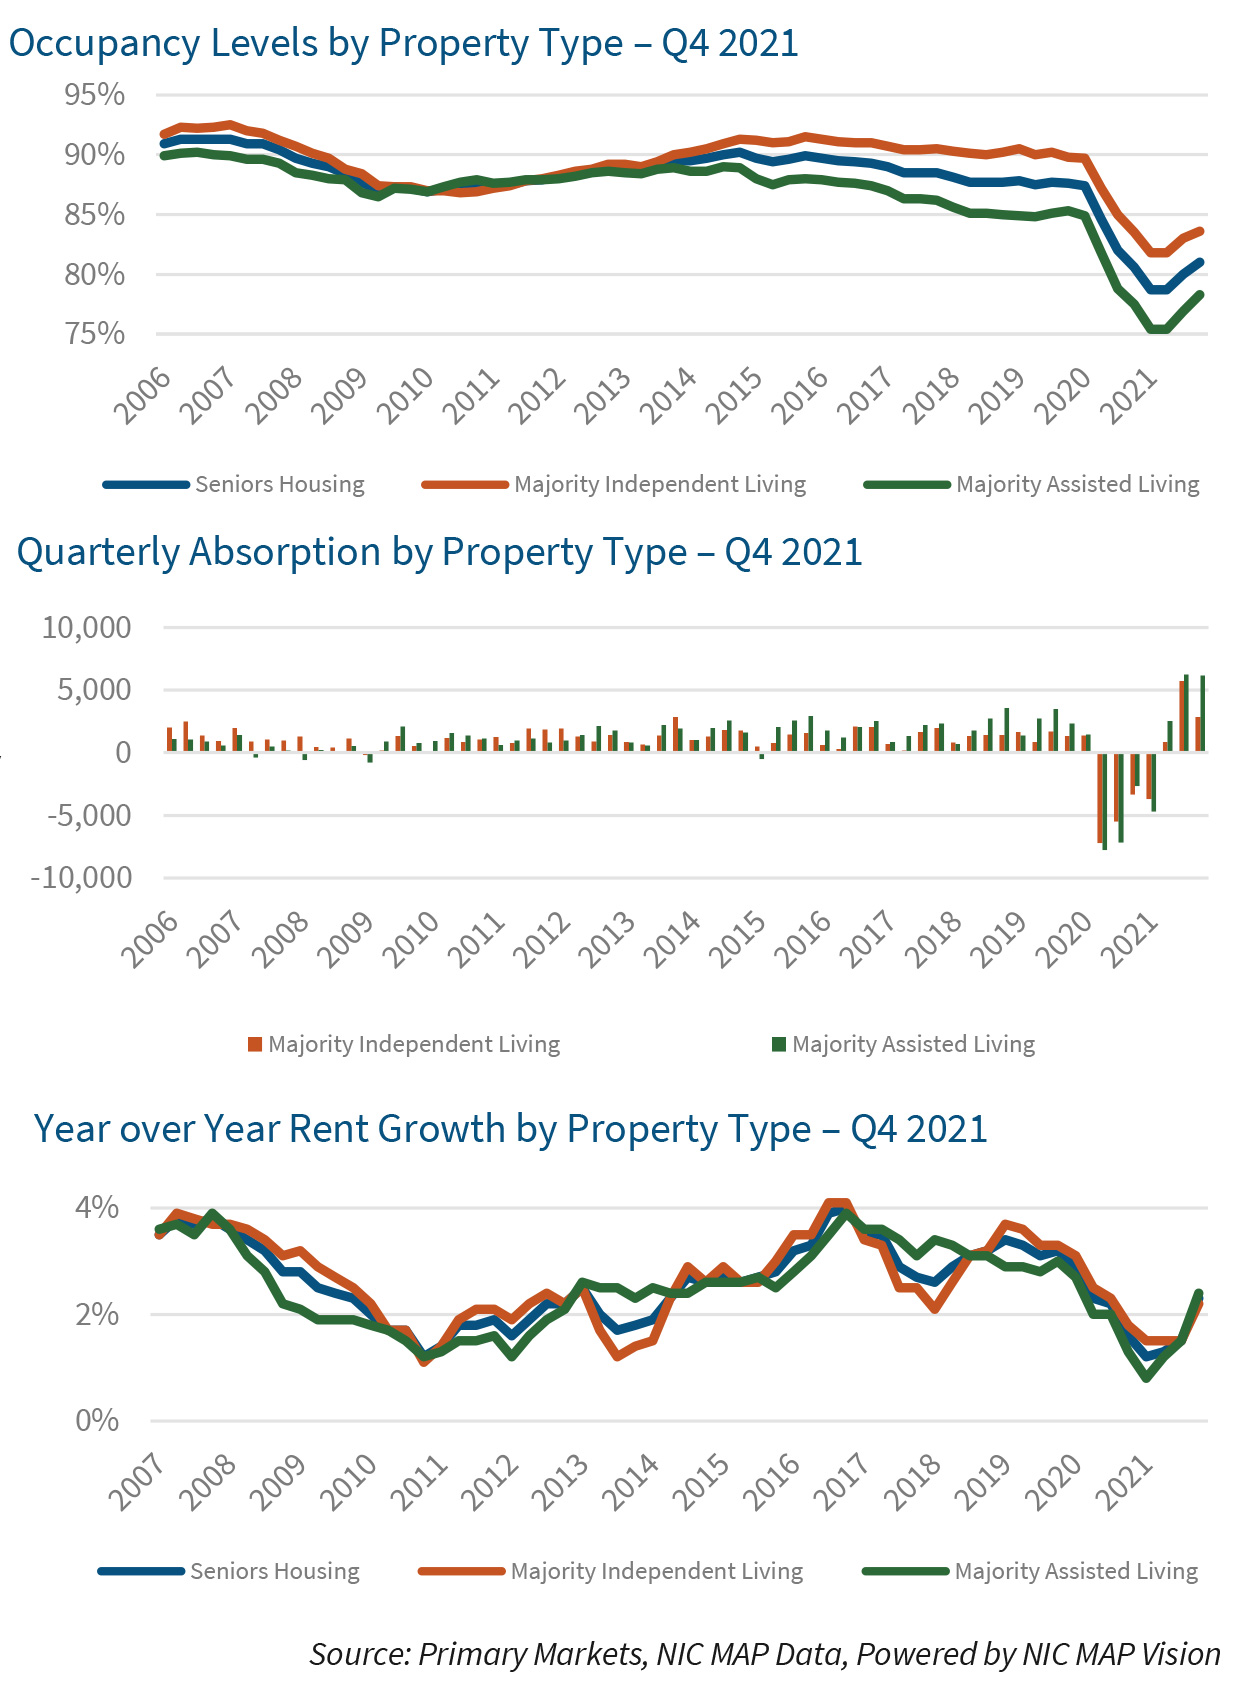 Occupancy Levels by Property Type – Q4 2021 | Quarterly Absorption by Property Type – Q4 2021 | Year over Year Rent Growth by Property Type – Q4 2021